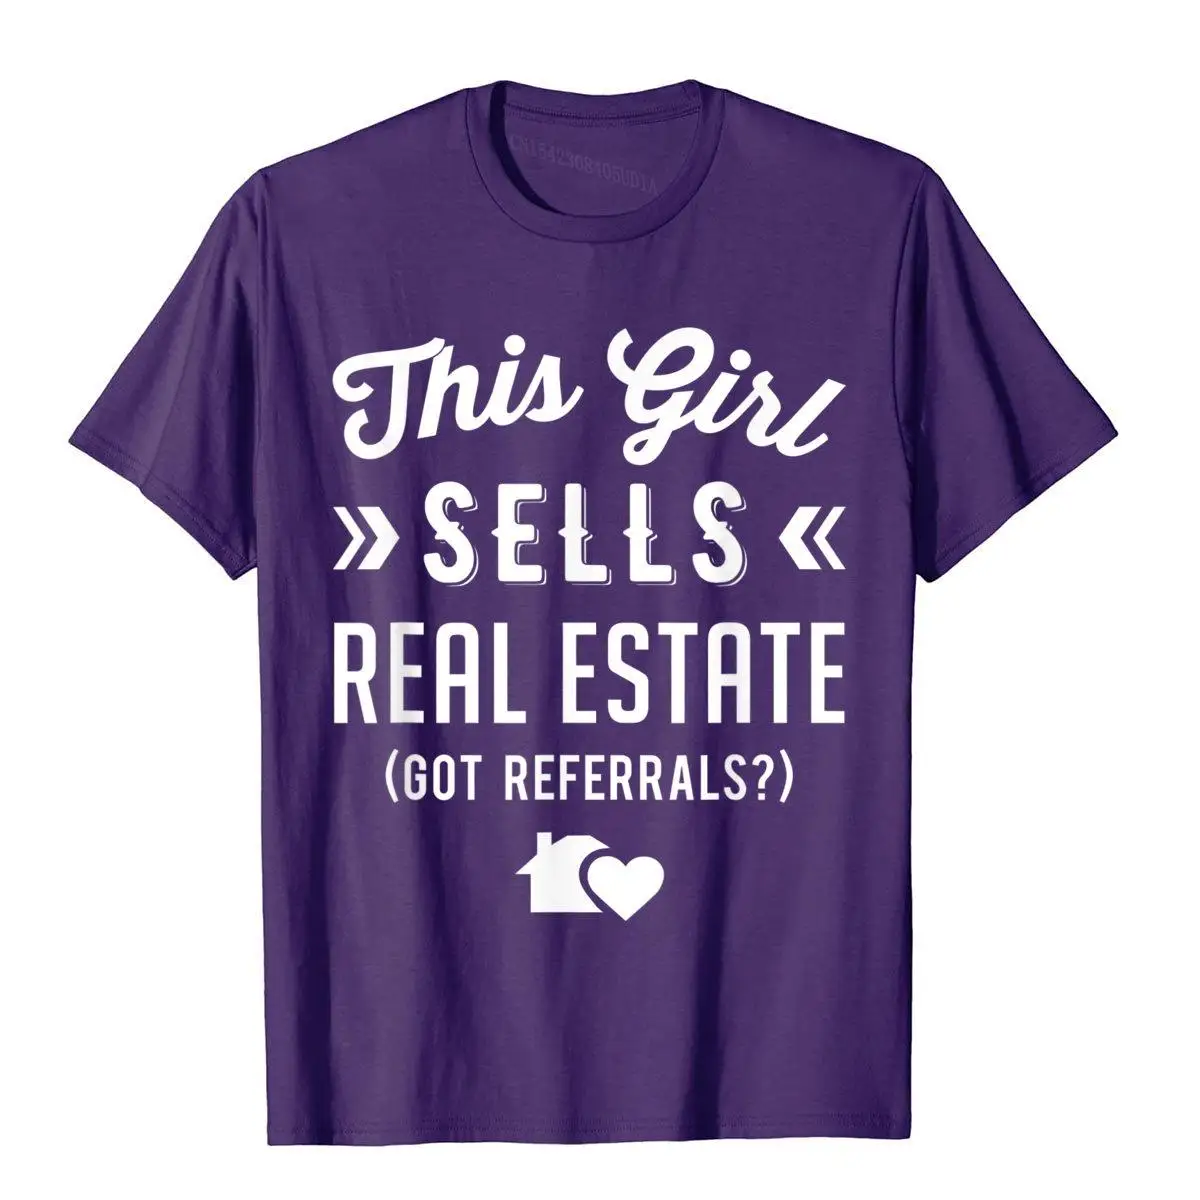 Real Estate Agent Shirt - This Girl Sells Real Estate__B5982purple